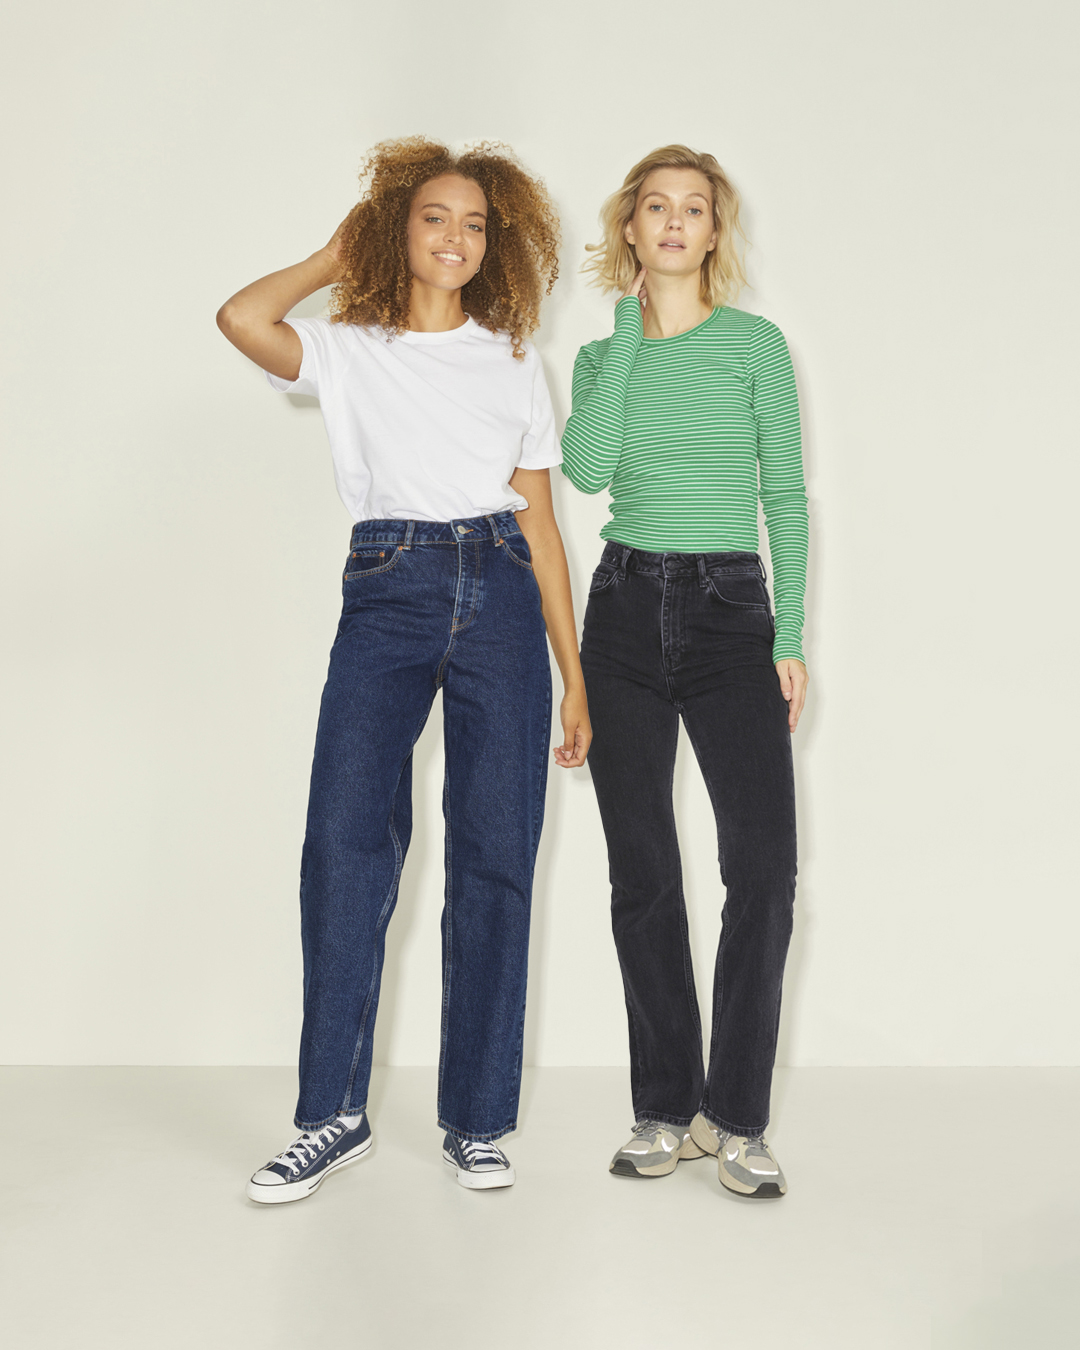 Two women model outfits from Hudson's Bay